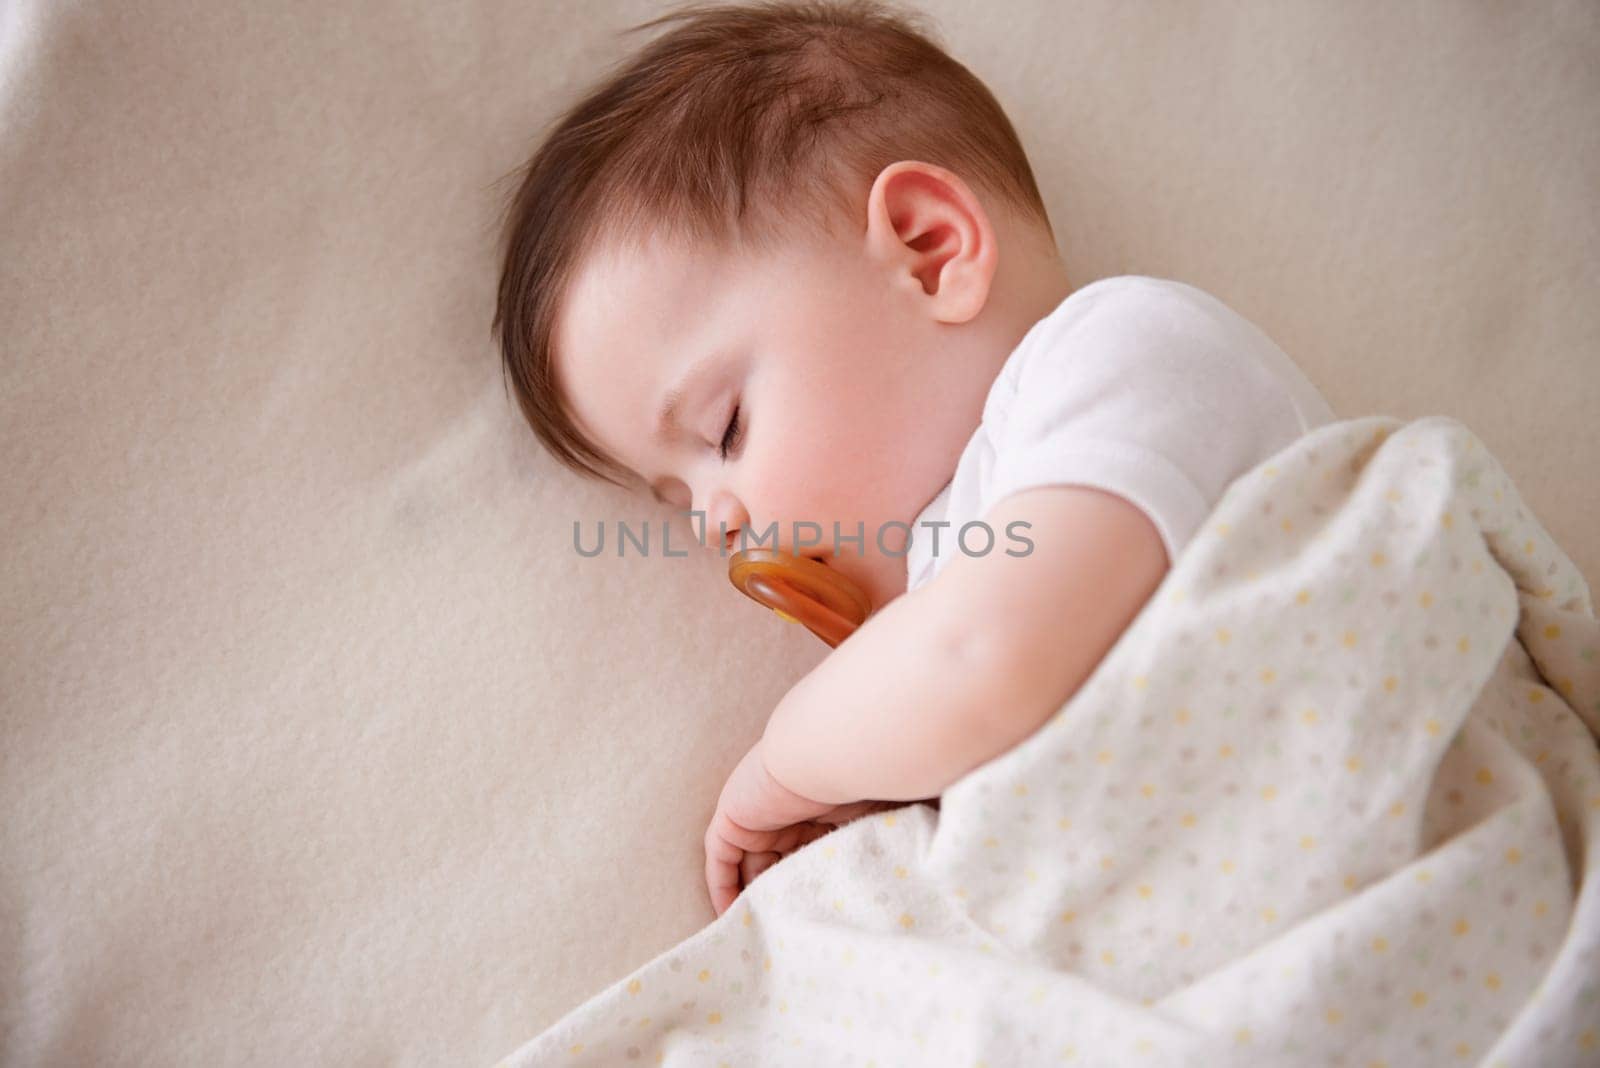 Baby, sleeping and home with tired, sleepy and nursery with peace in a bed with blanket. Morning, youth and kid with dream of an infant with child development from rest in a bedroom with a newborn.